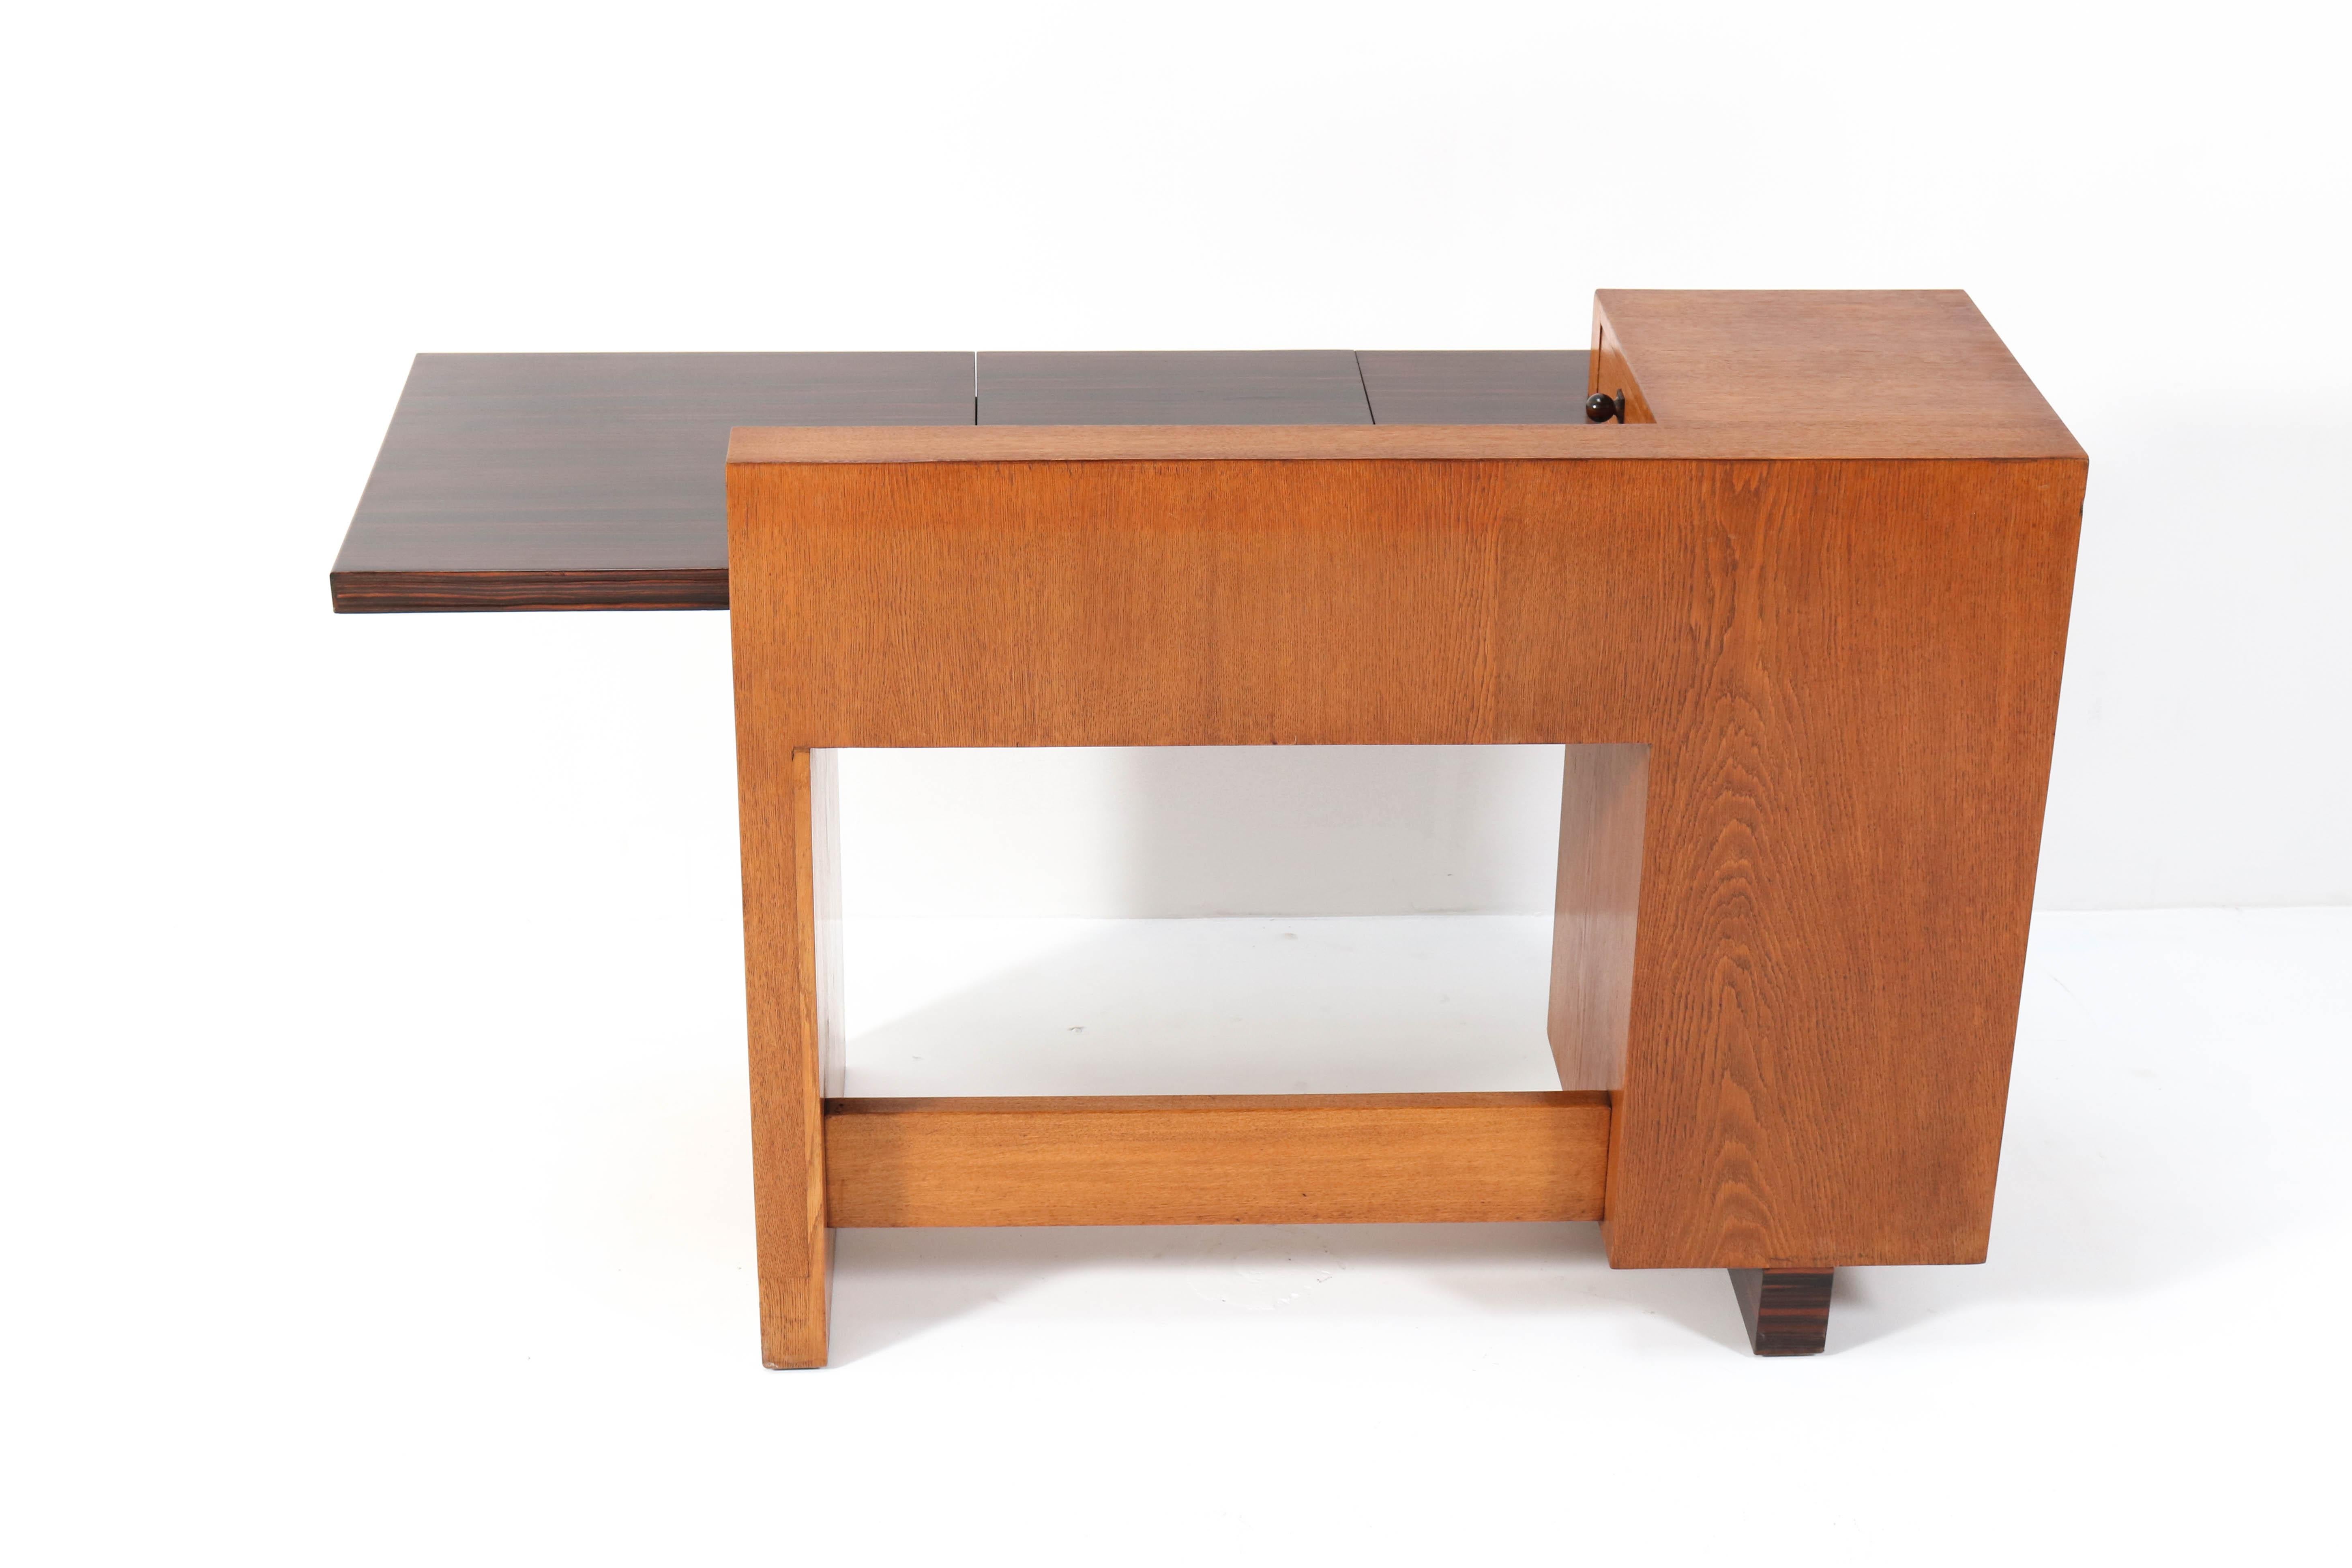 Early 20th Century Oak Art Deco Modernist Writing Table by Hendrik Wouda for Pander, 1924 For Sale